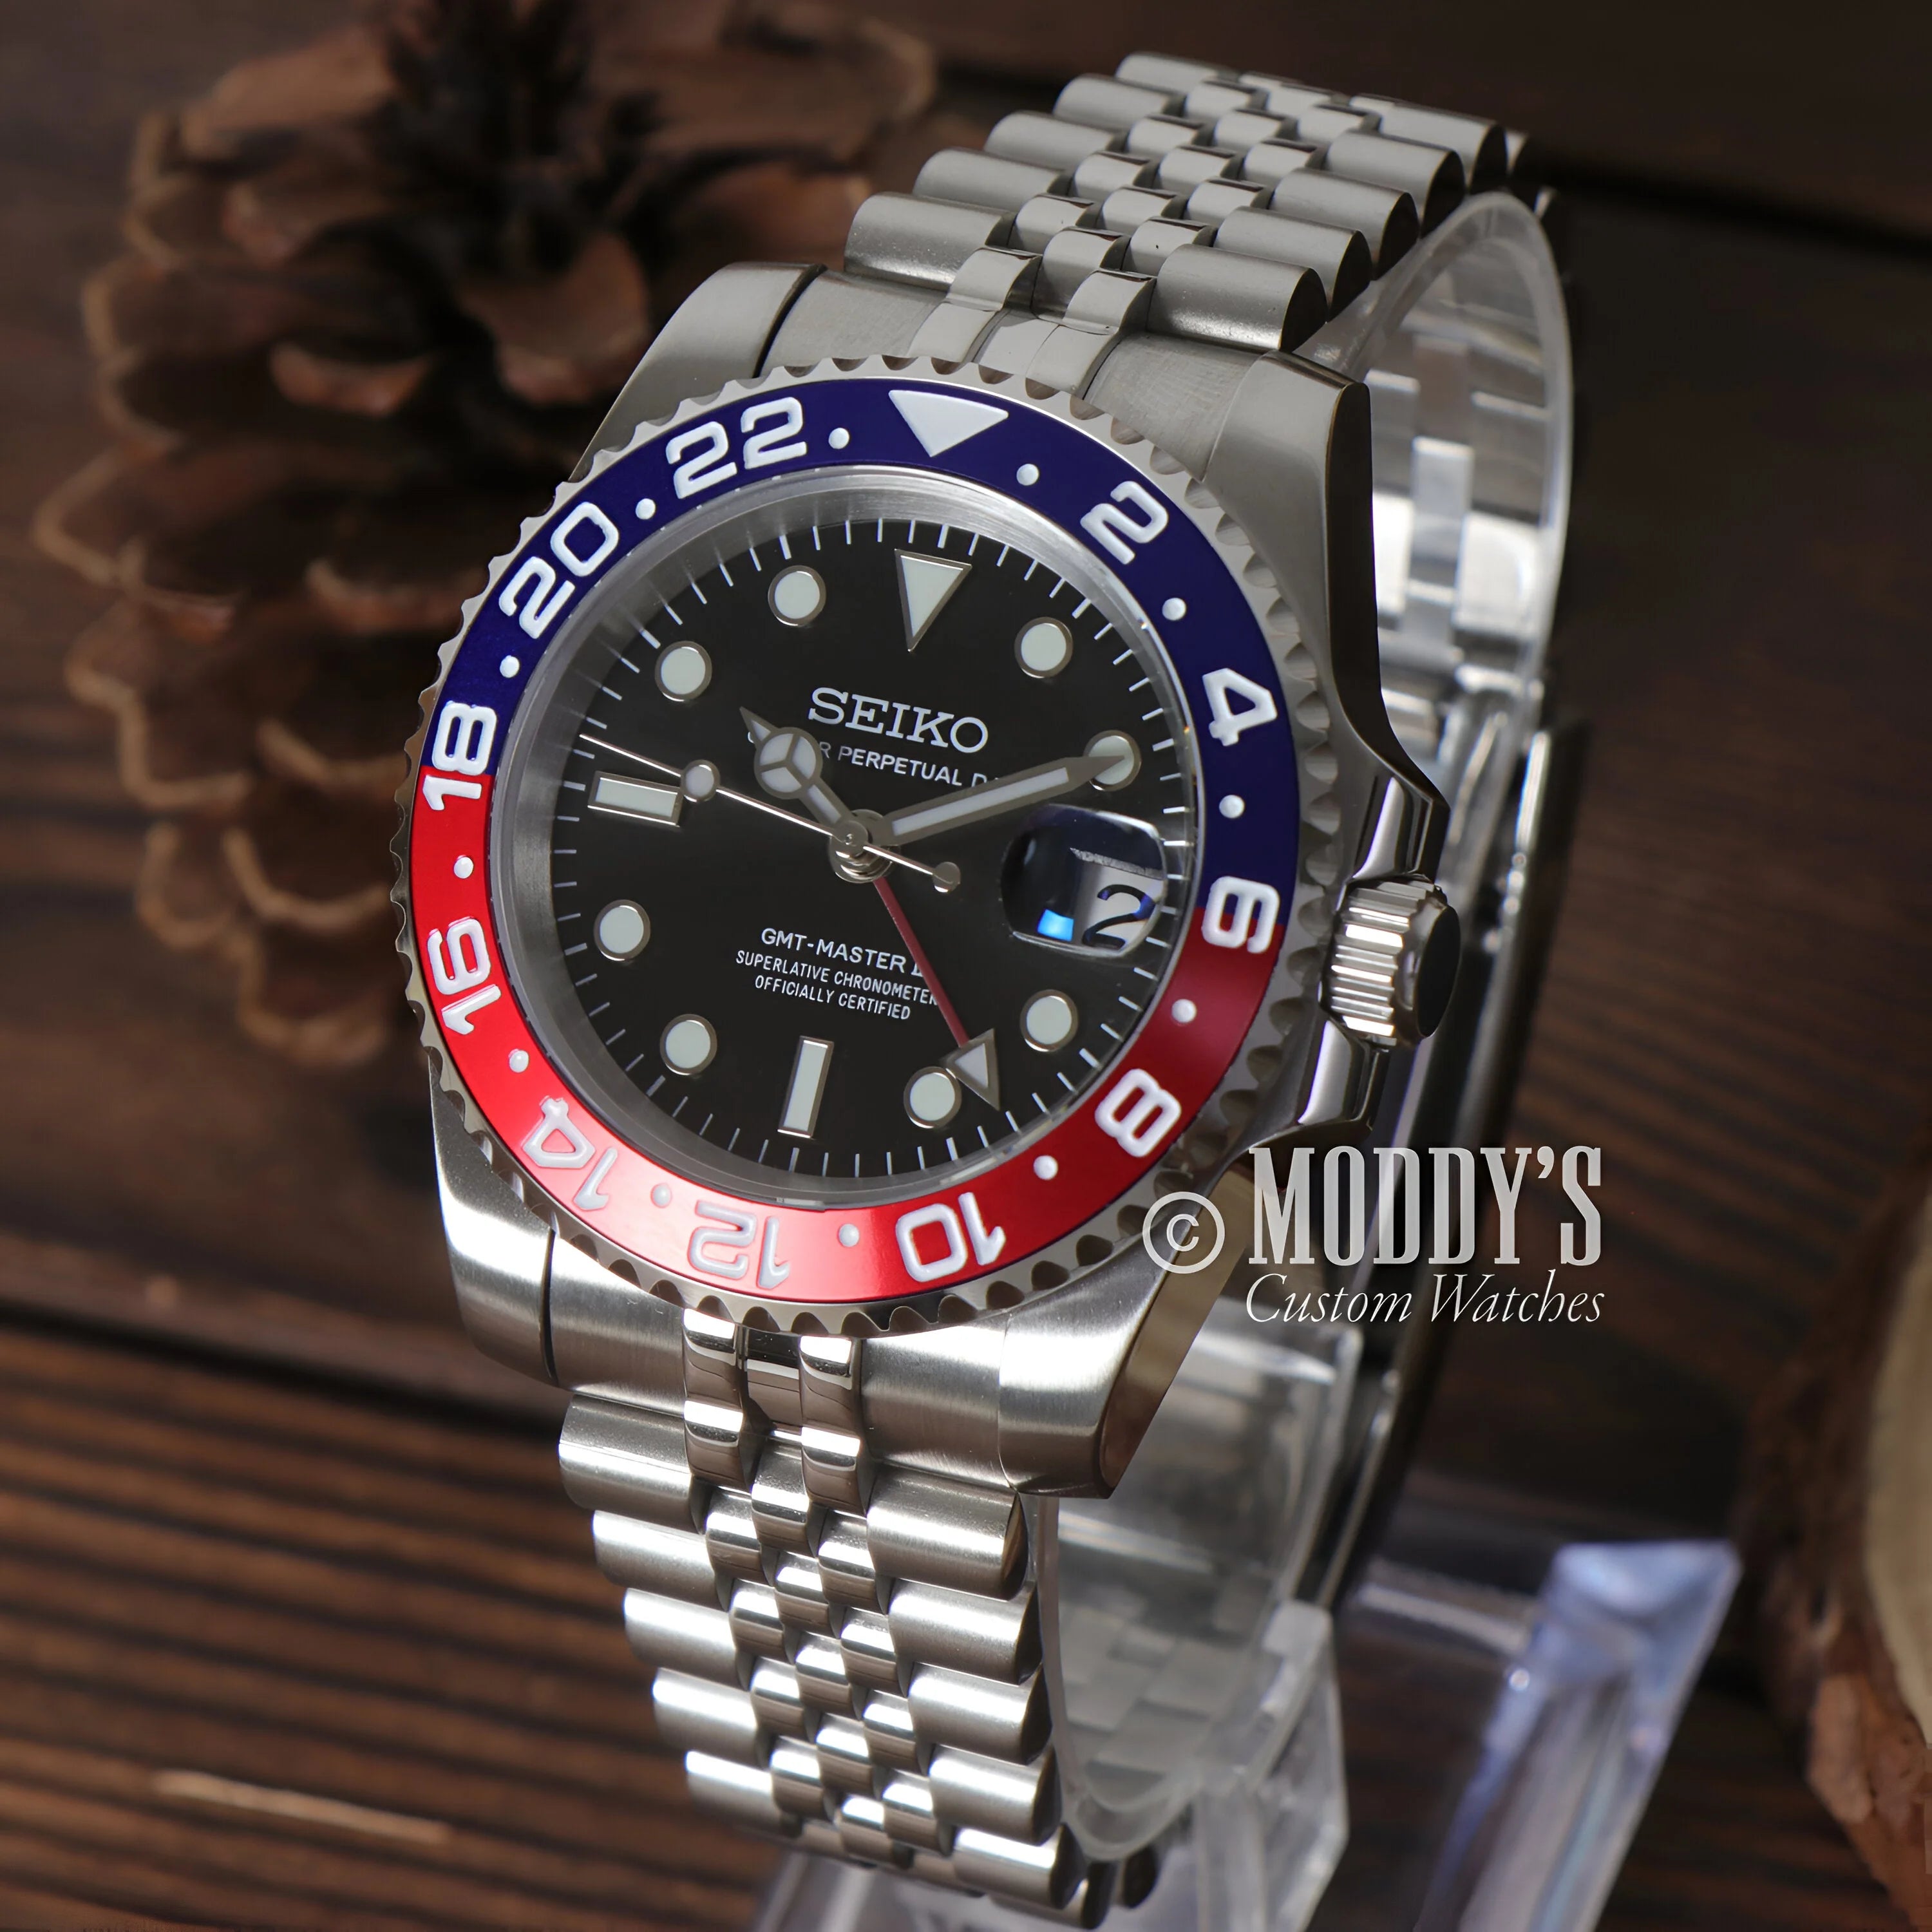 Seiko Gmteiko Pepsi Gmt Watch With Red And Blue Bezel In a Sleek Stainless Steel Case